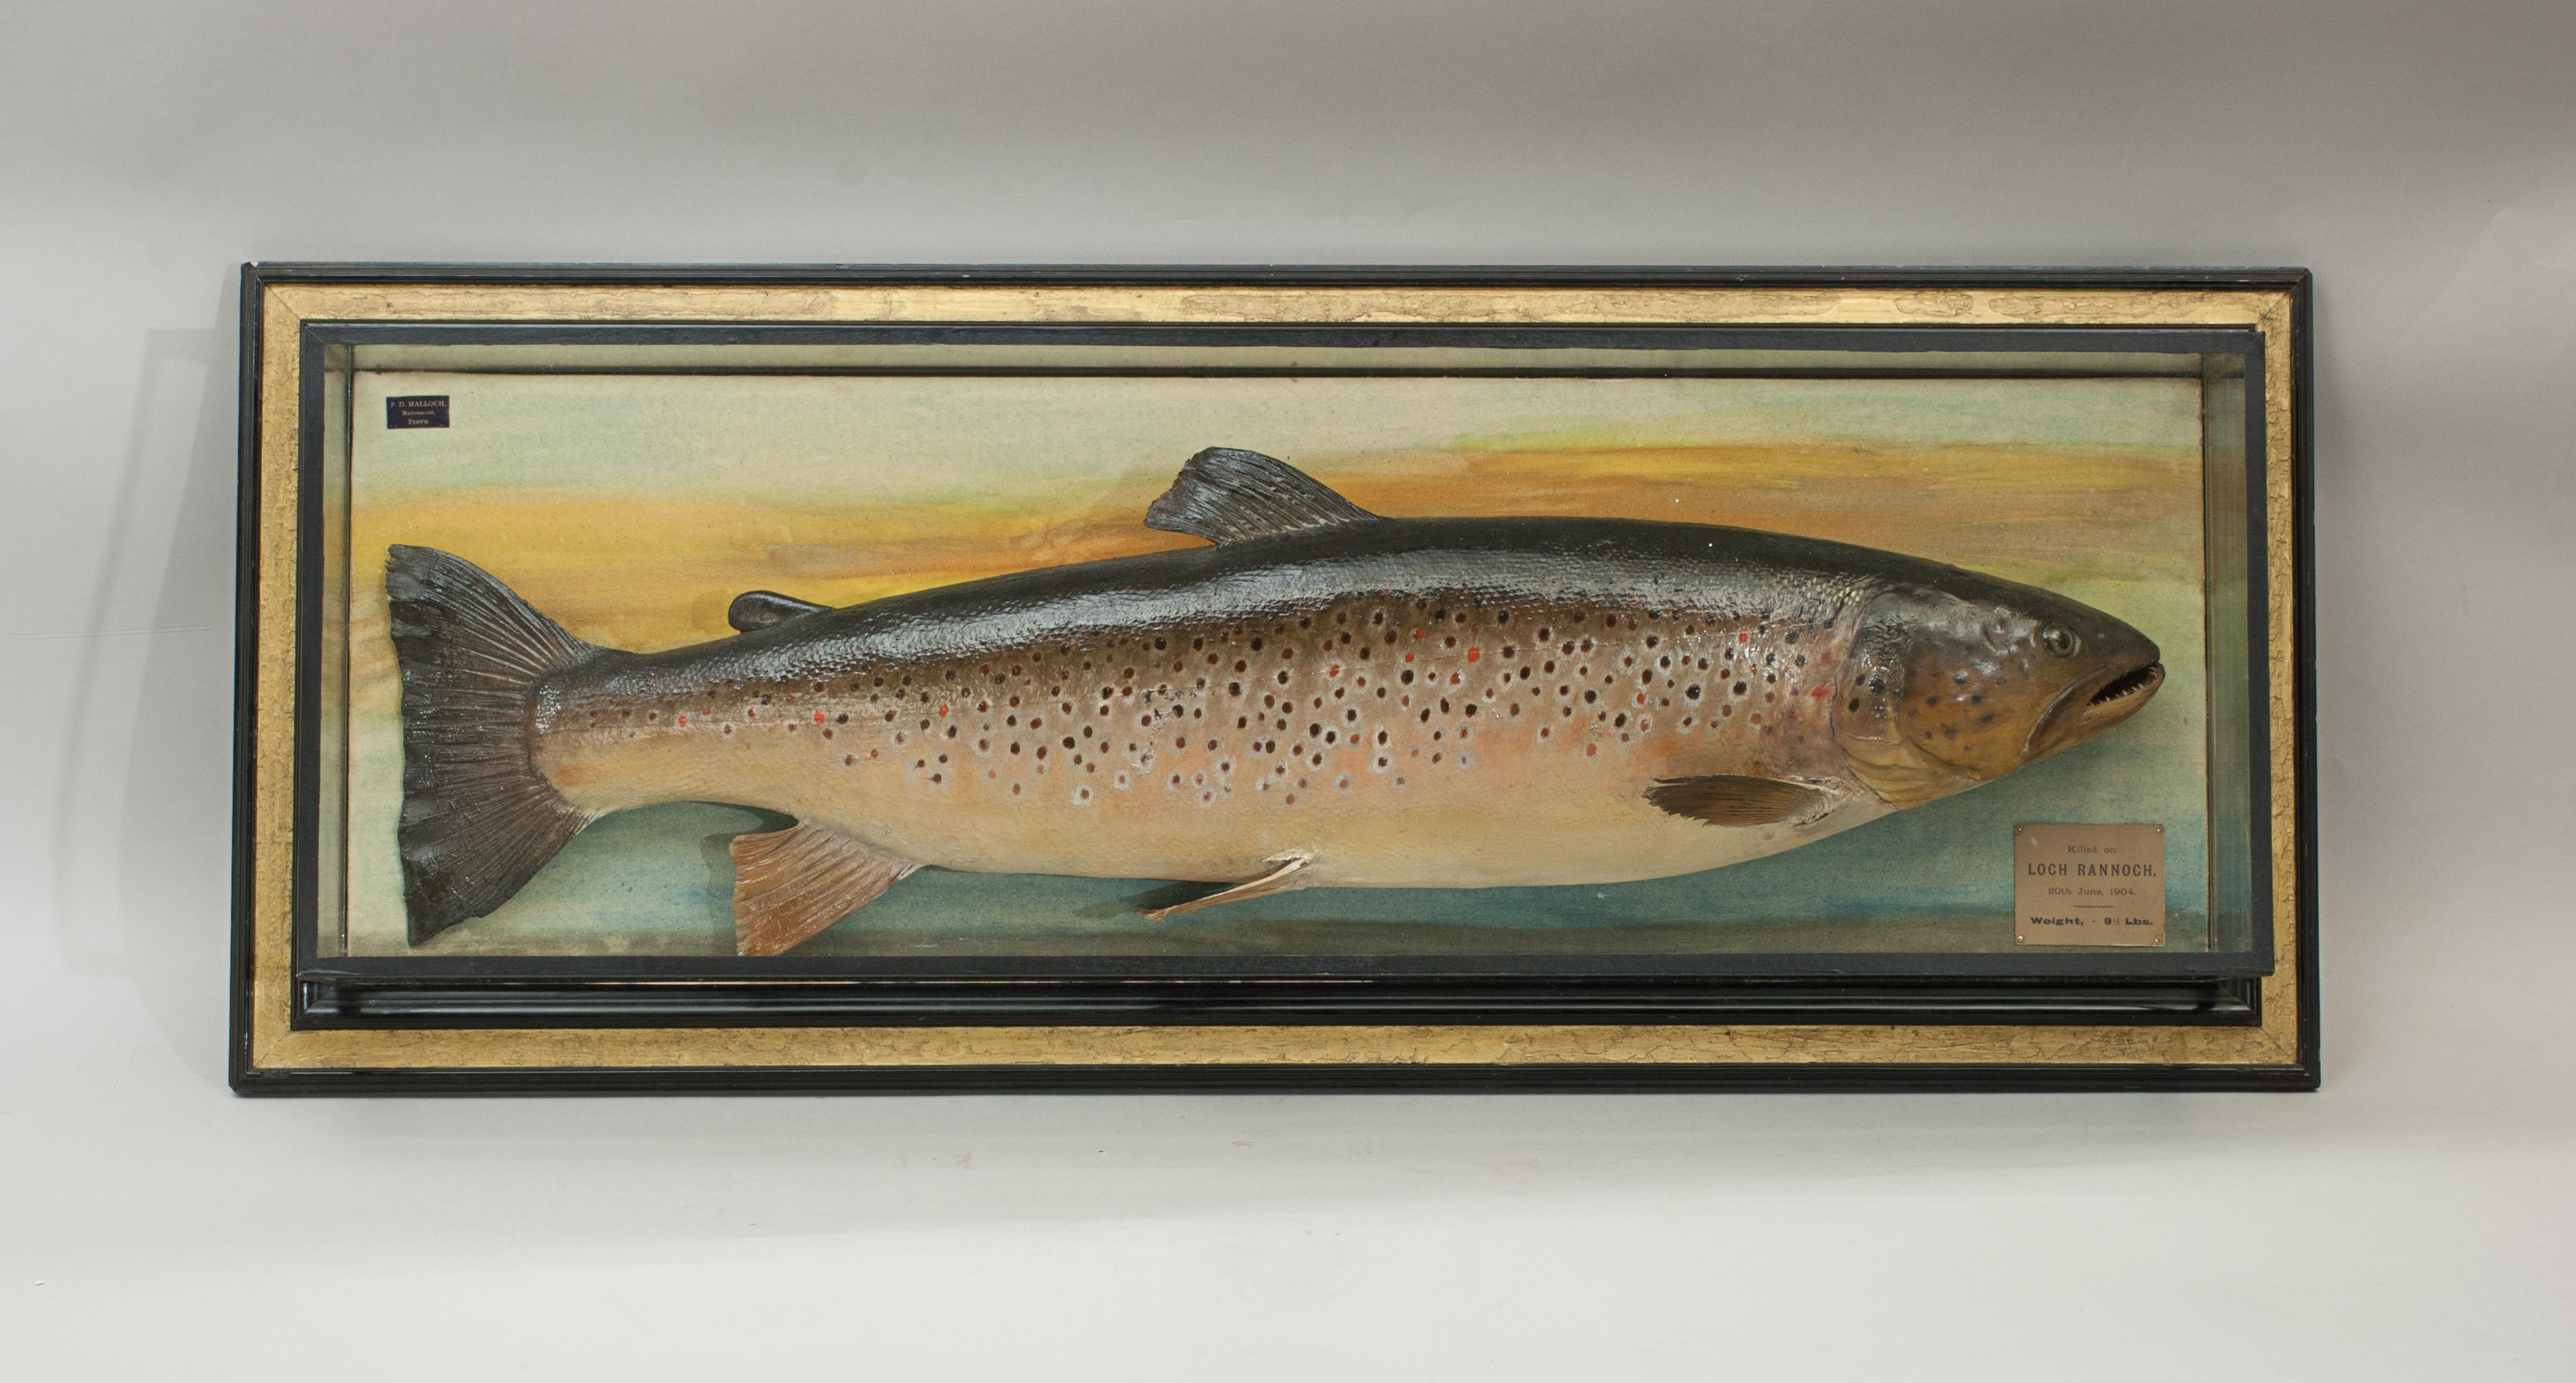 Malloch brown trout trophy fish model.
An excellent brown trout in original display case. The naturalistically painted fish is with the dorsal fin, adipose fin, pectoral fin, pelvic fin, anal fin and tail fin and is beautifully executed and painted